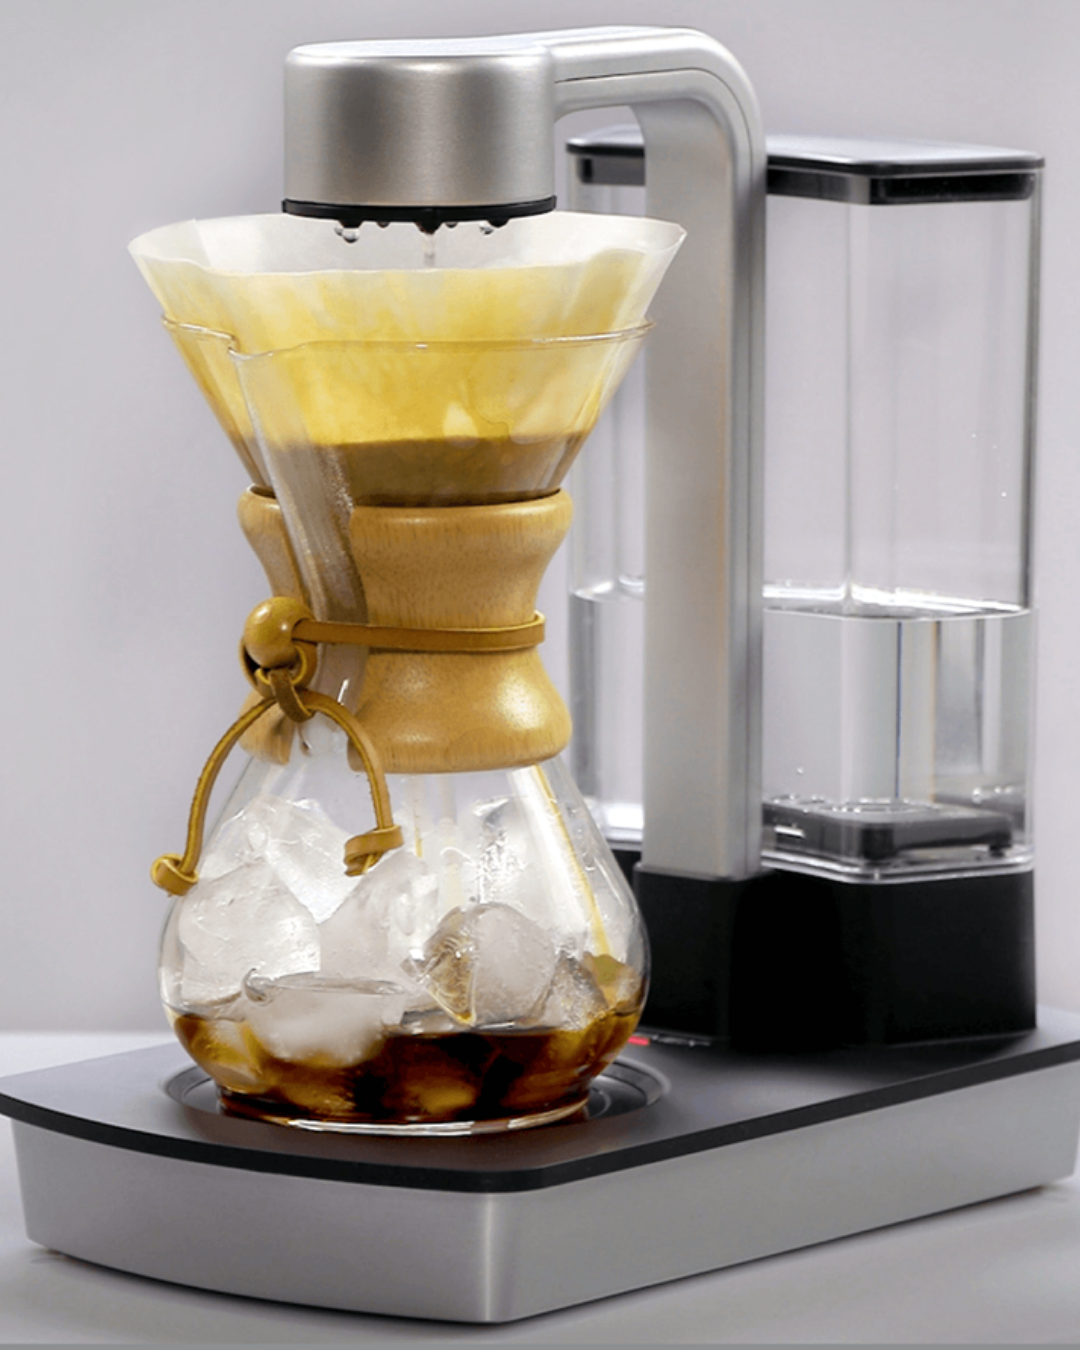 Chemex Ottomatic 2.0 Automatic Pour-Over Coffee Maker + Reviews